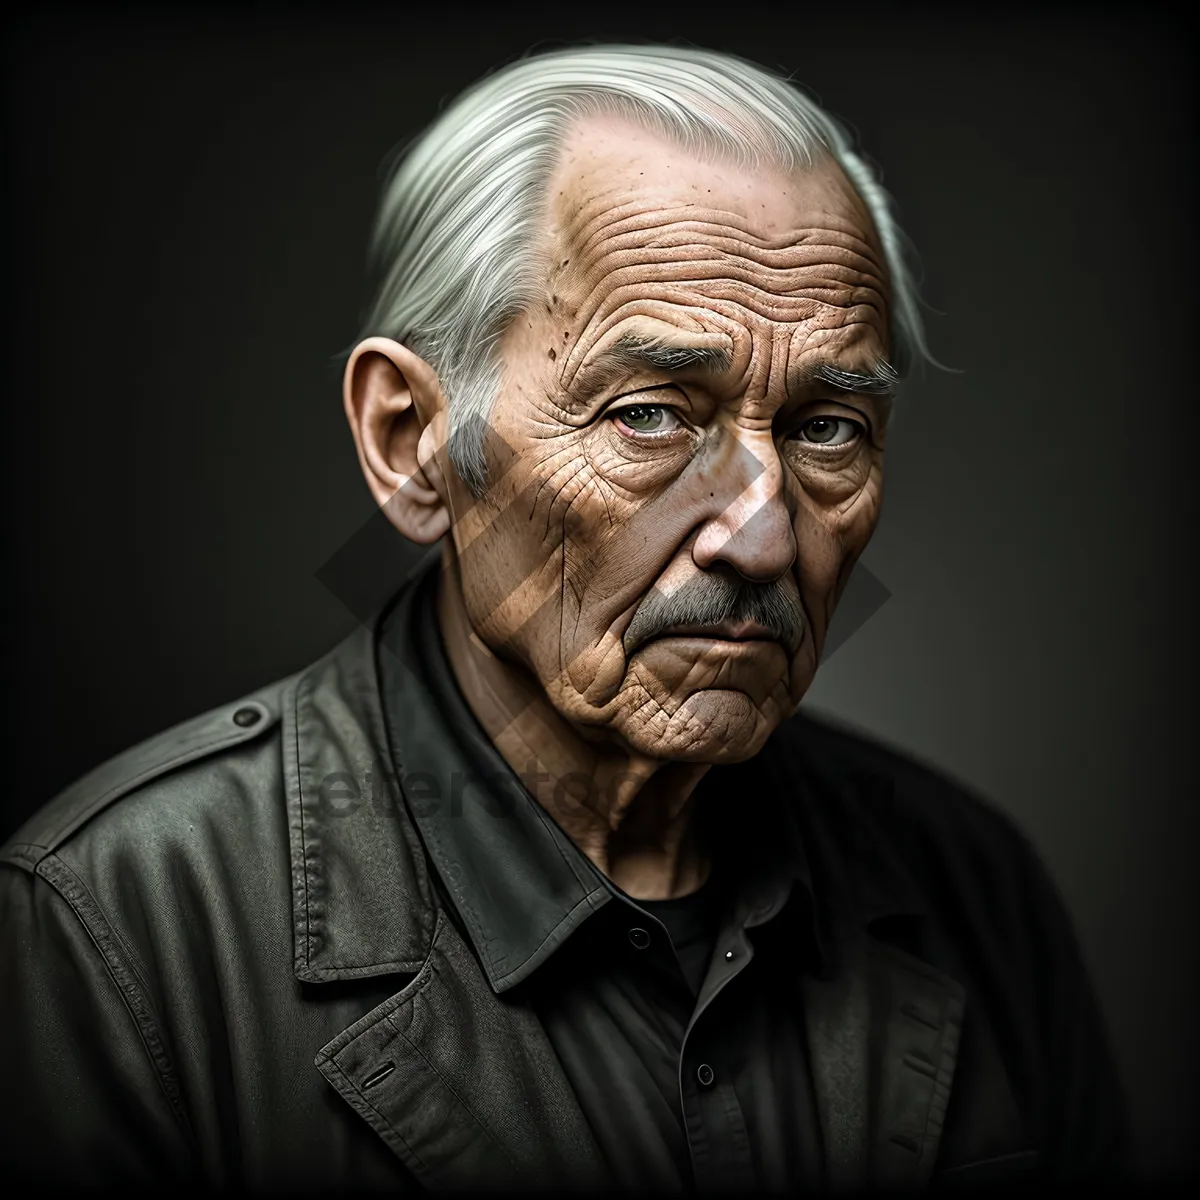 Picture of Serious elderly man portrait bust